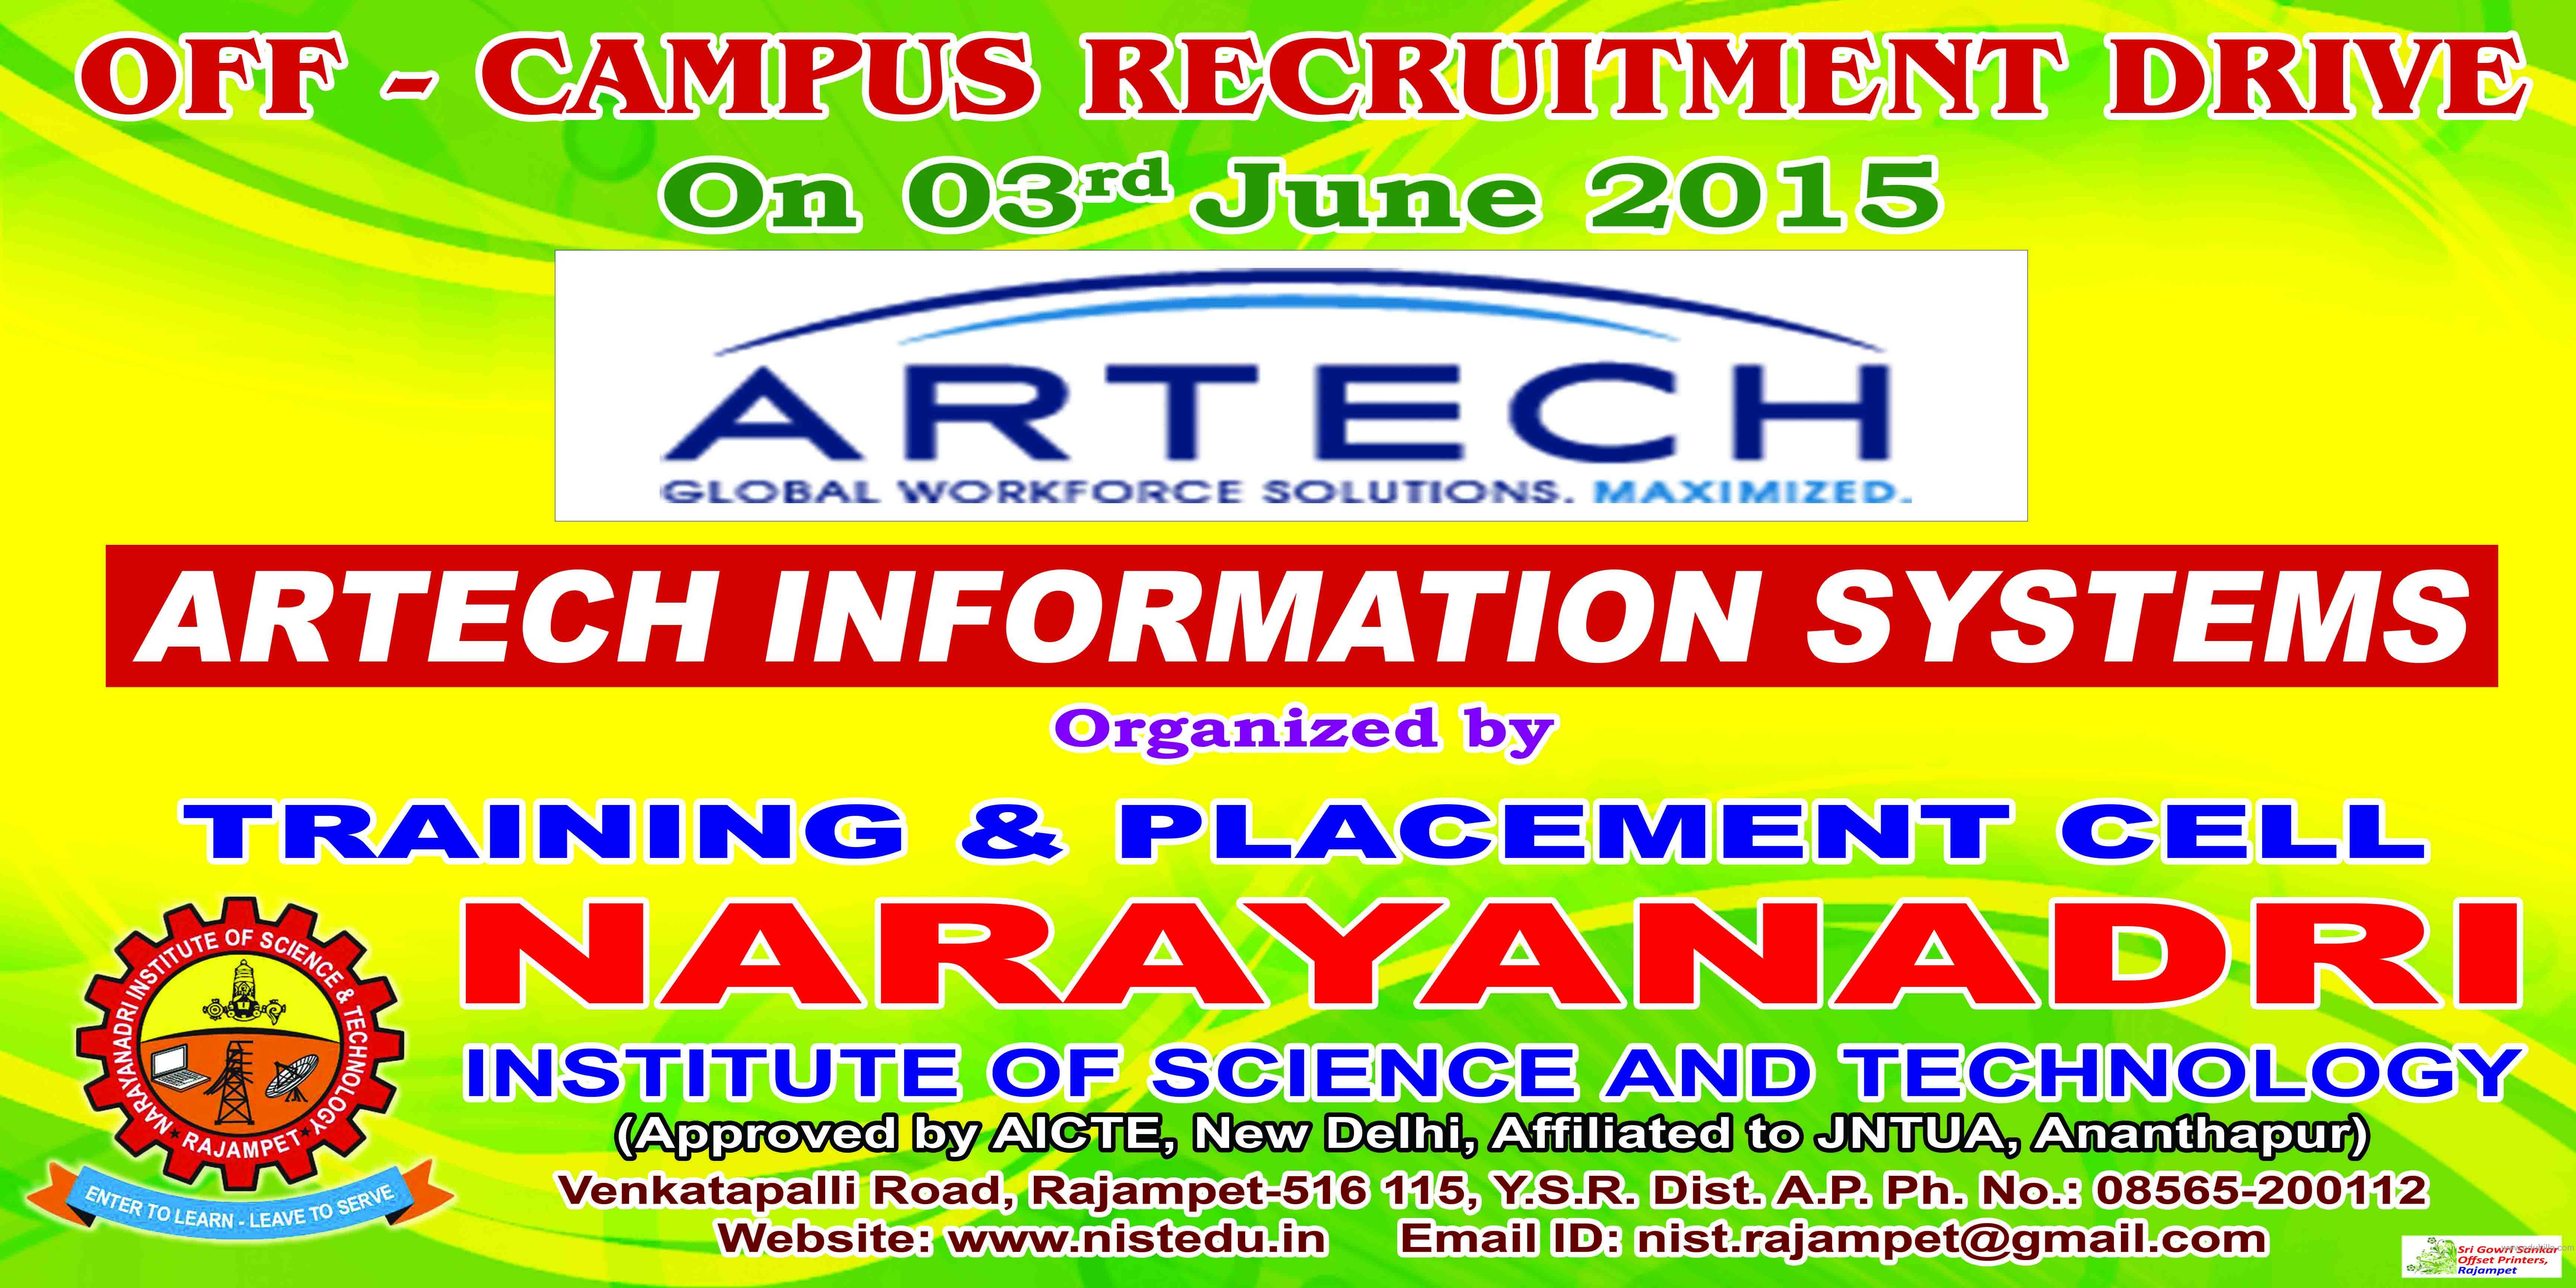 Campus Placement drive 